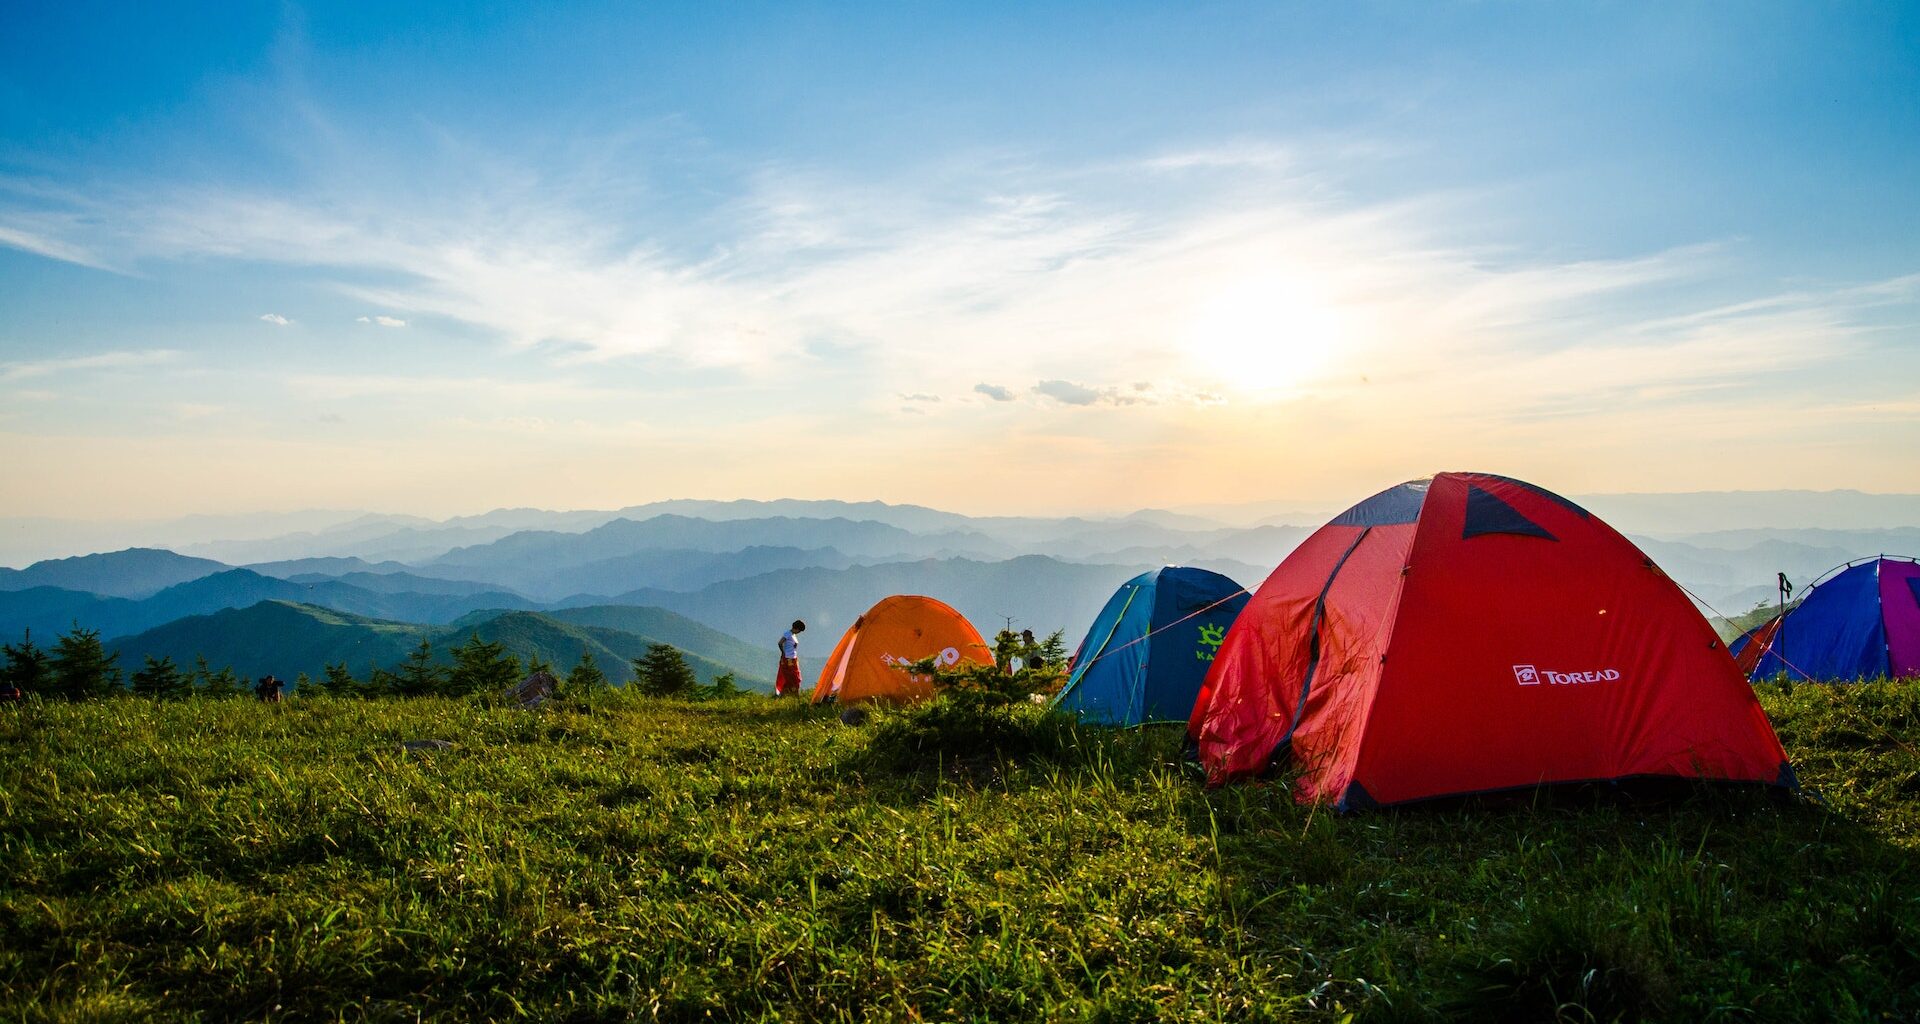 Pitched Dome Tents Overlooking Mountain Ranges